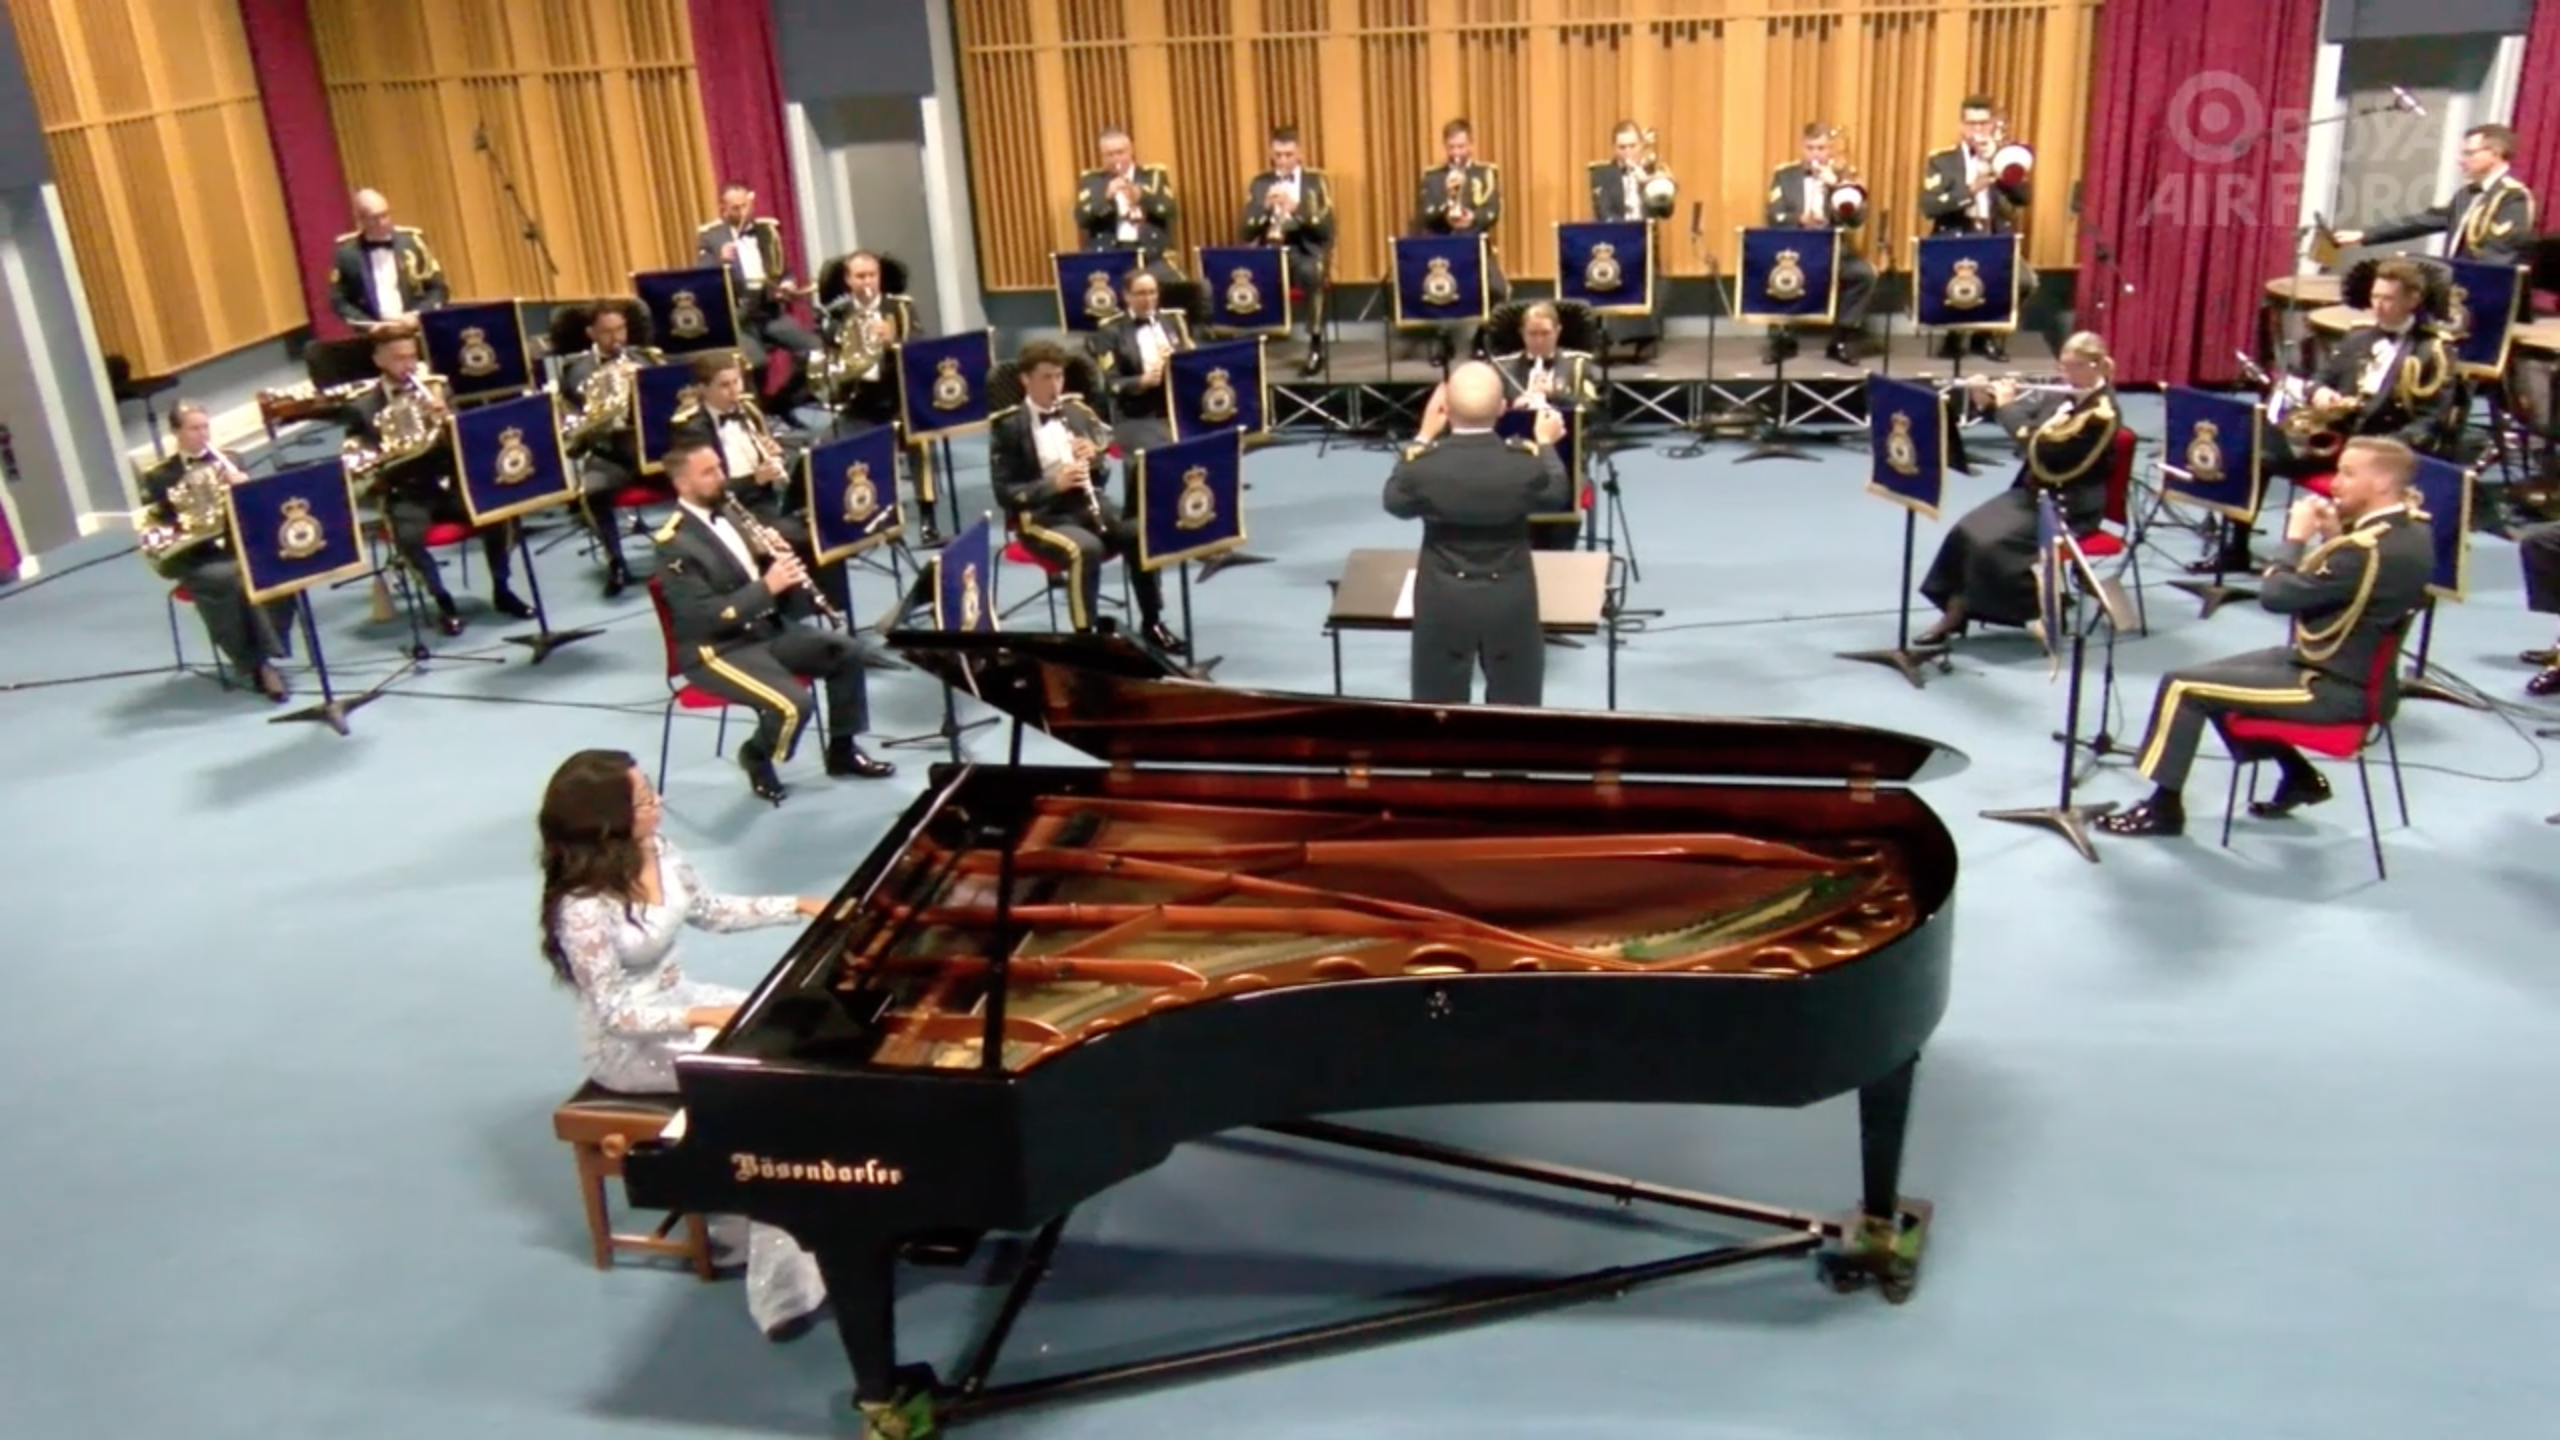 Ify playing the piano with the RAF Musicians.